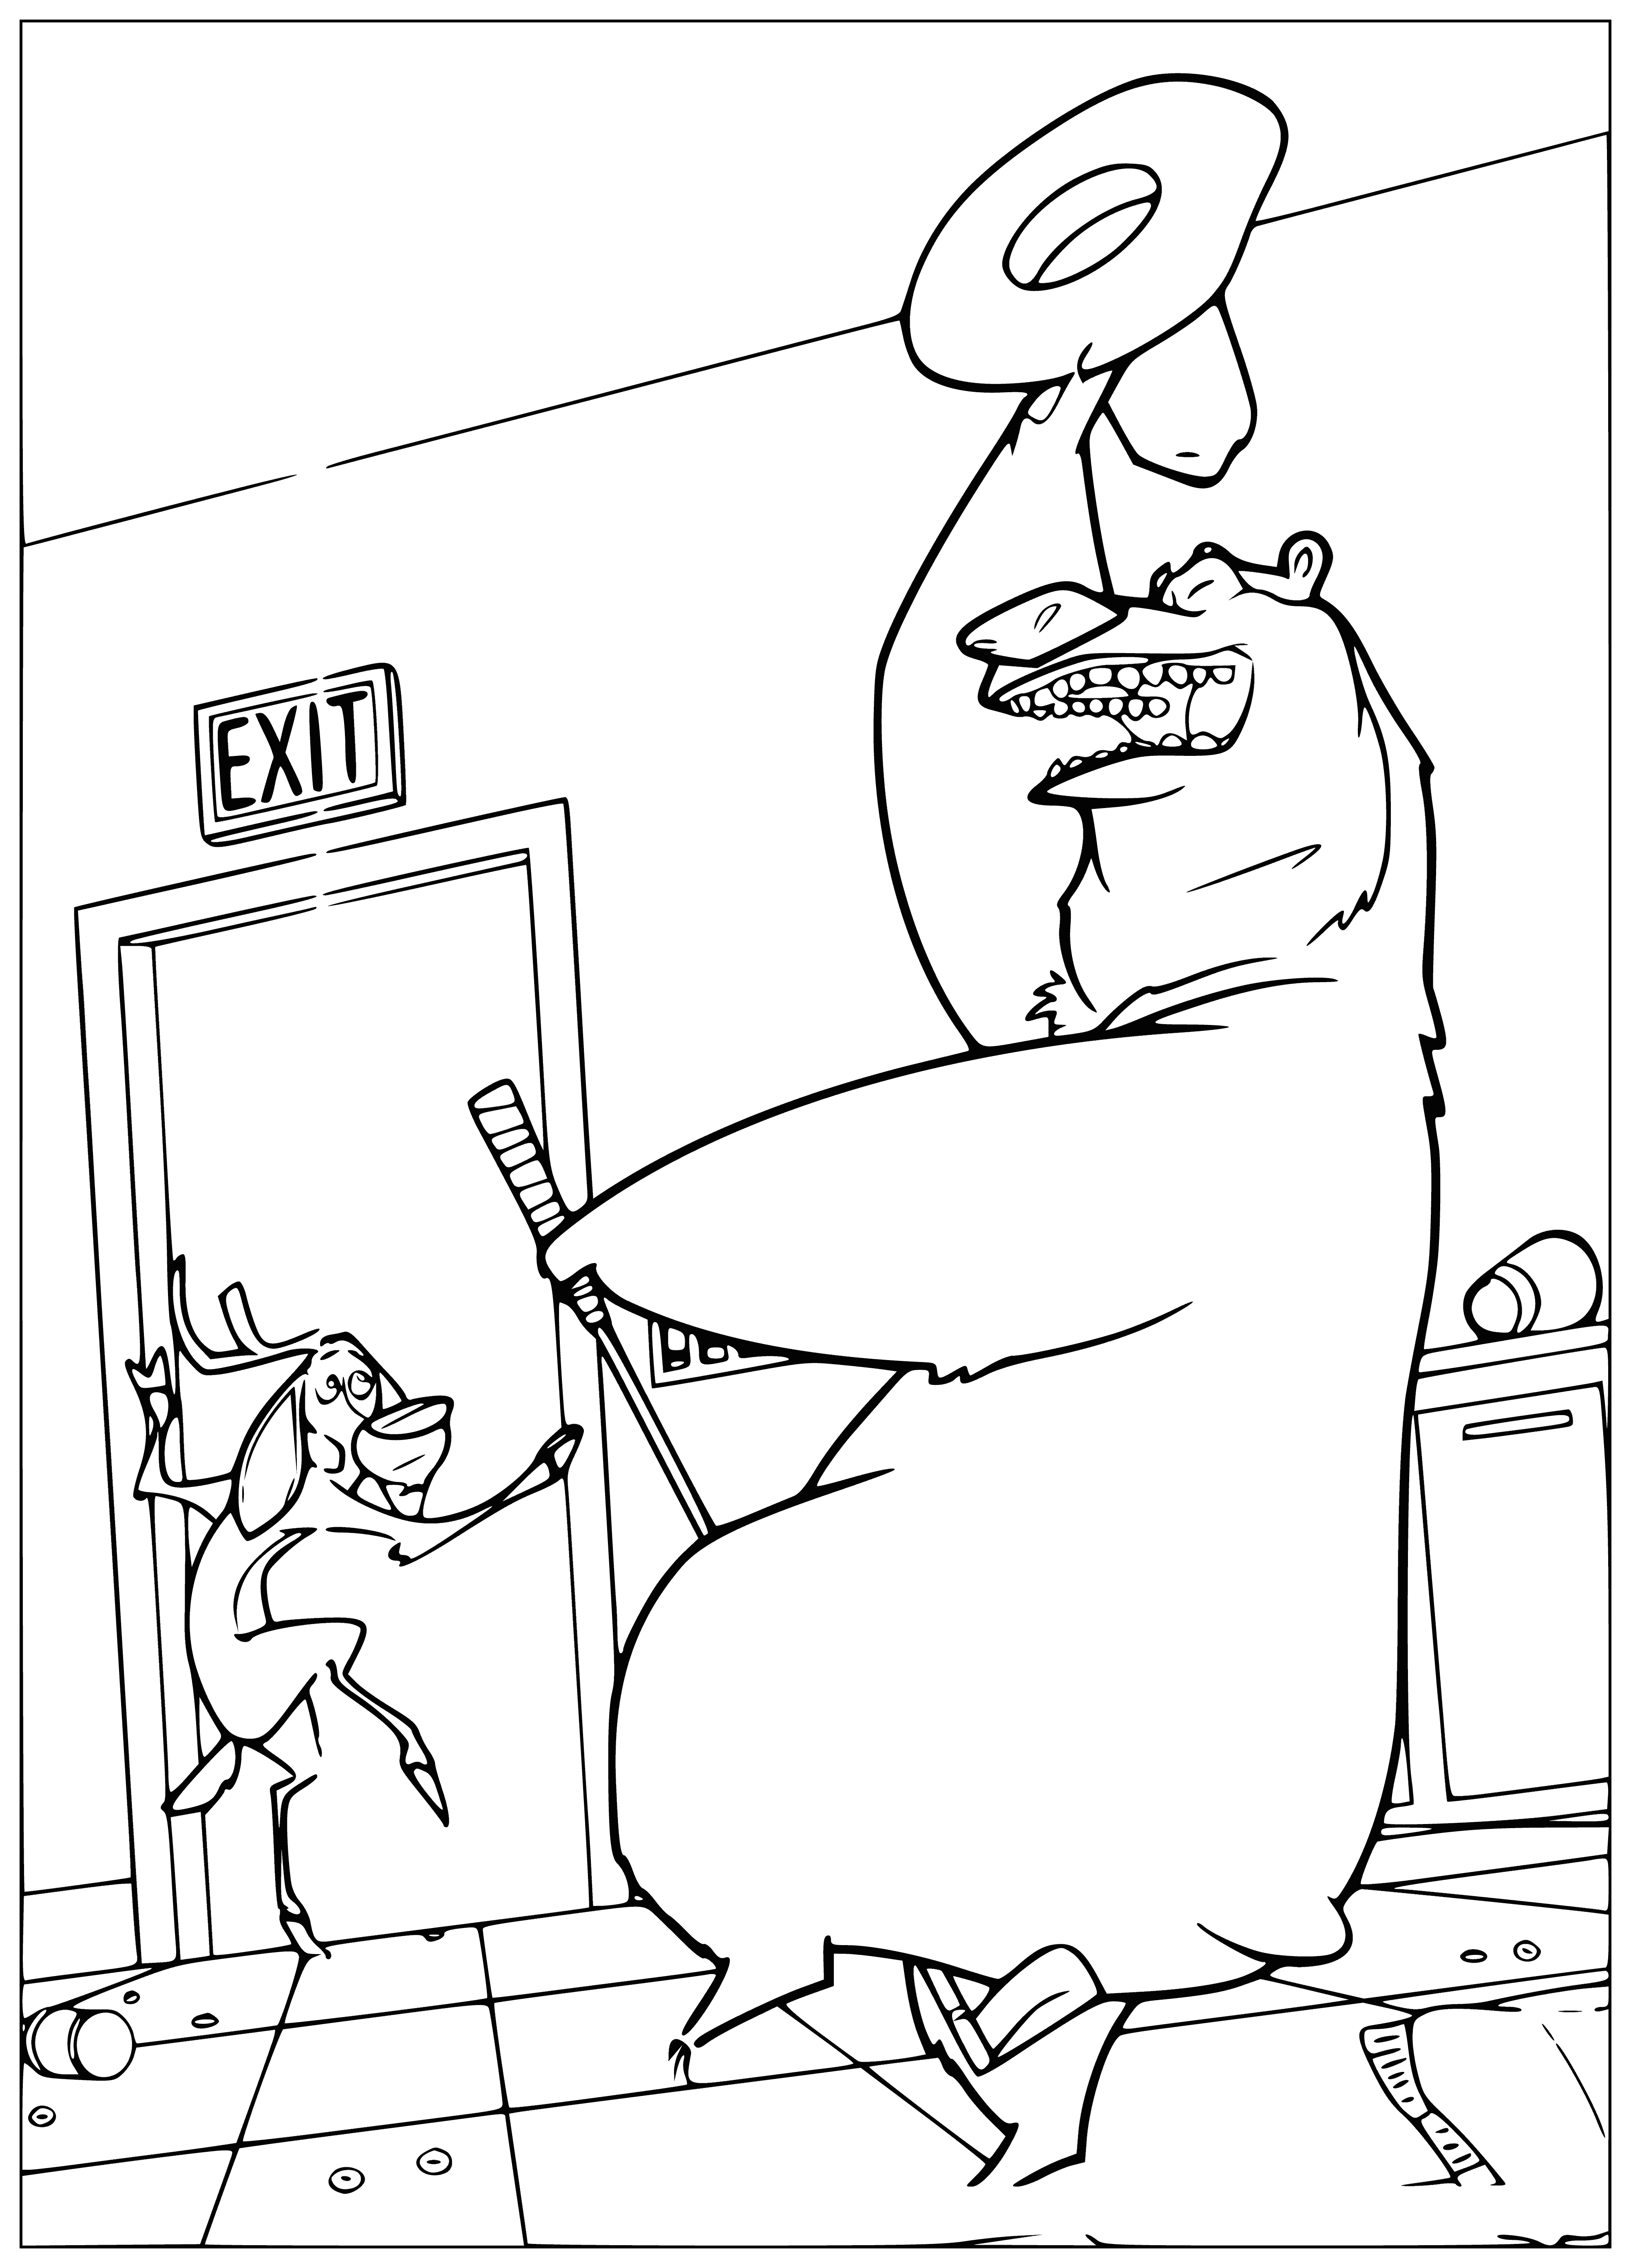 coloring page: Mouse is searching store shelves for something, looking for a special find.